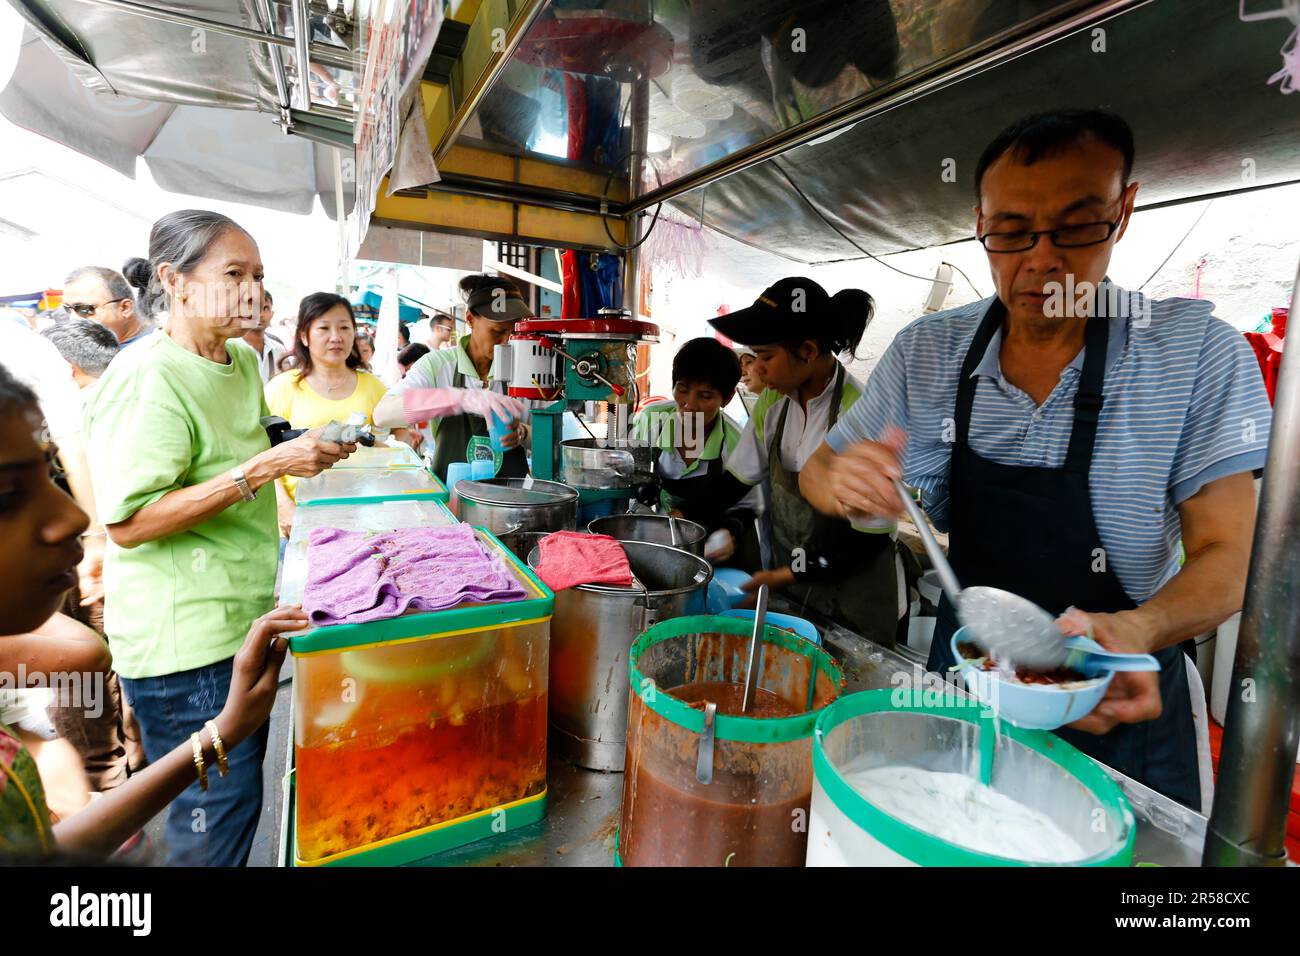 Georgetown, Penang, Malaysia - July 18, 2014: Penang Road Famous Cendol is a local foodie landmark in Georgetown, Penang, Malaysia. Cendol is an iced Stock Photo